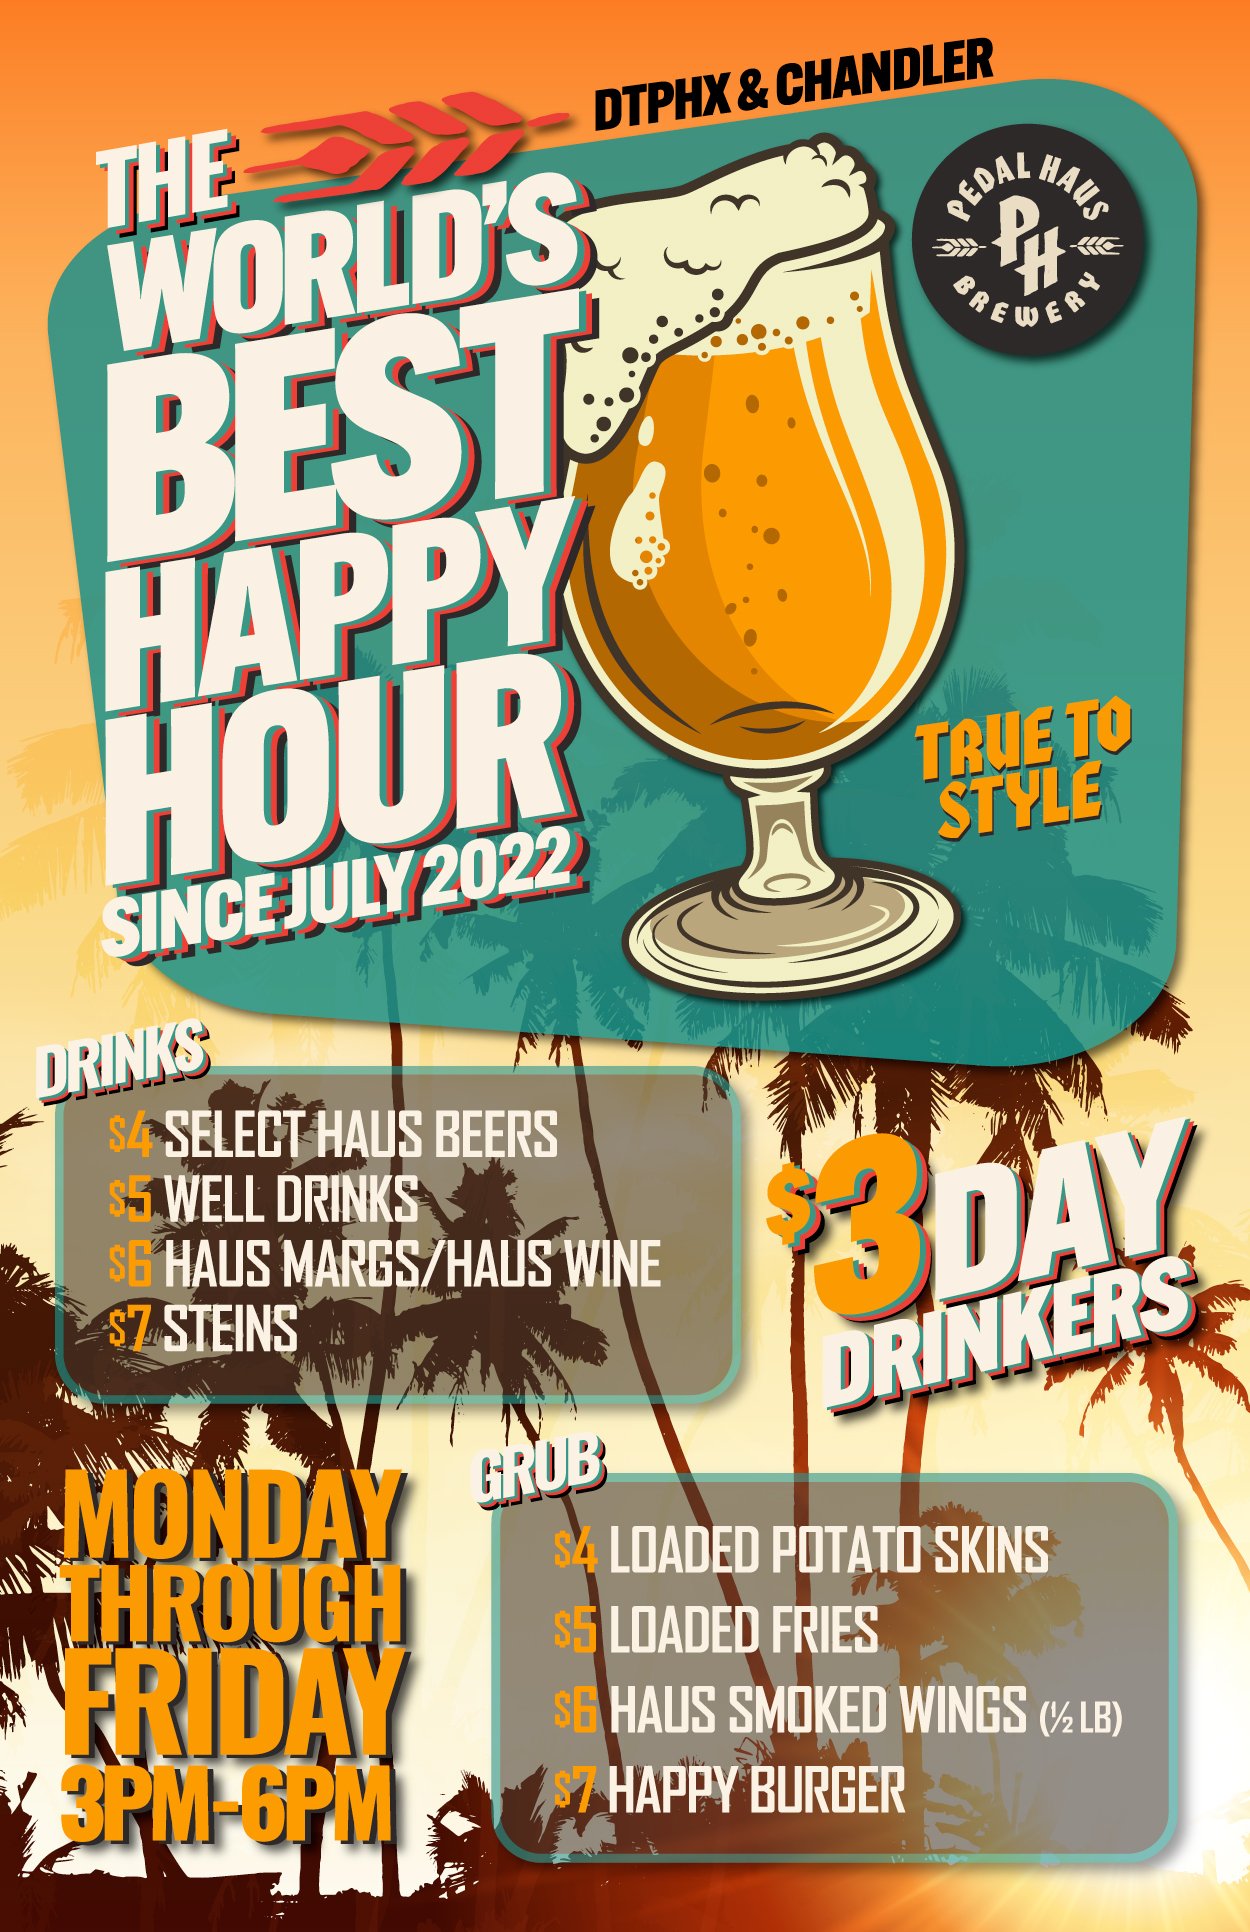 Discounted happy hour specials